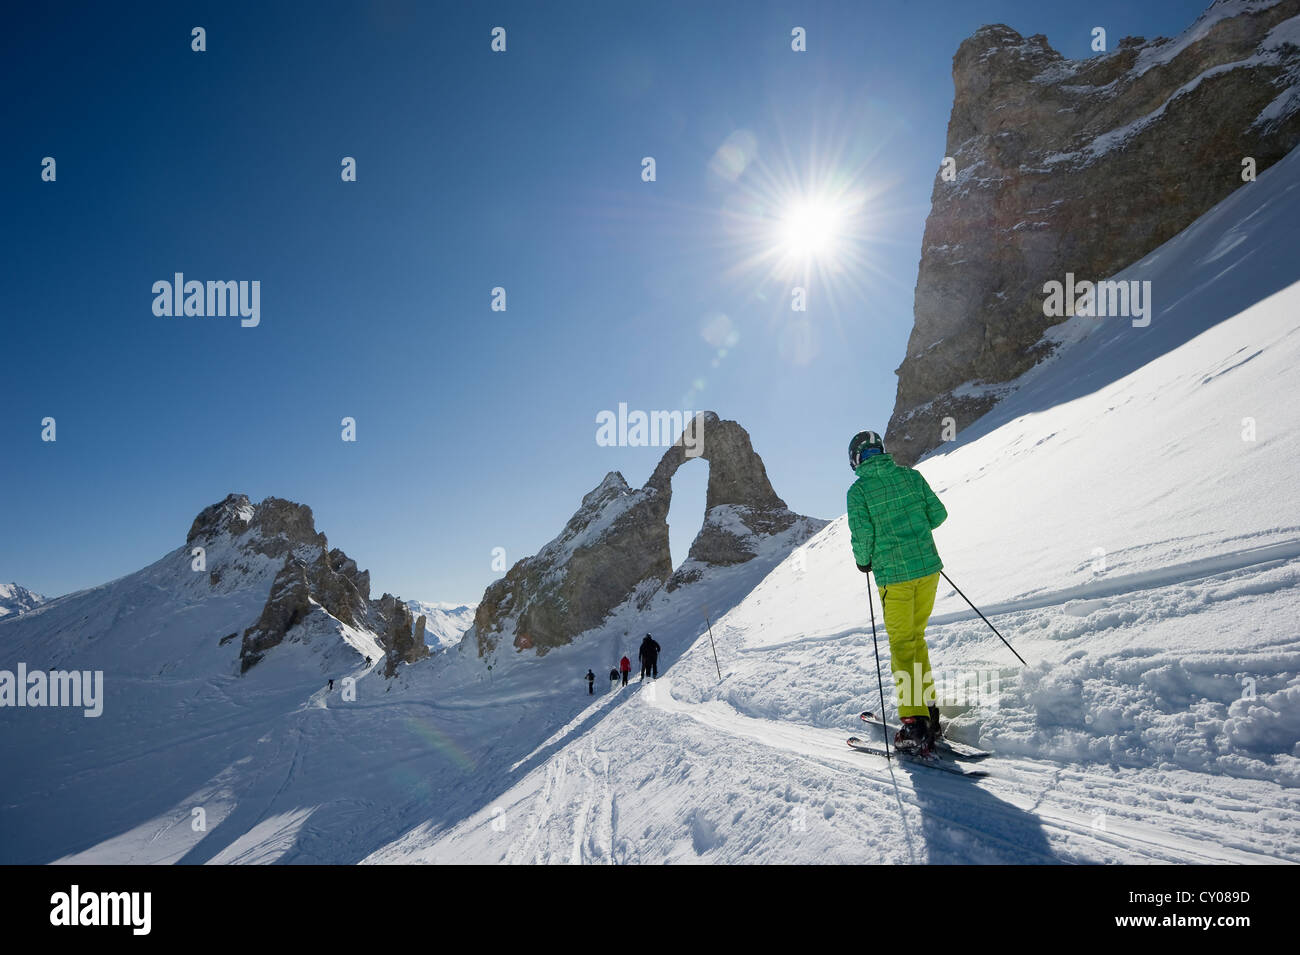 Cross-country skiers in the snow-covered mountain landscape, Aiguille Percee, Tignes, Val d'Isere, Savoie, Alps, France, Europe Stock Photo